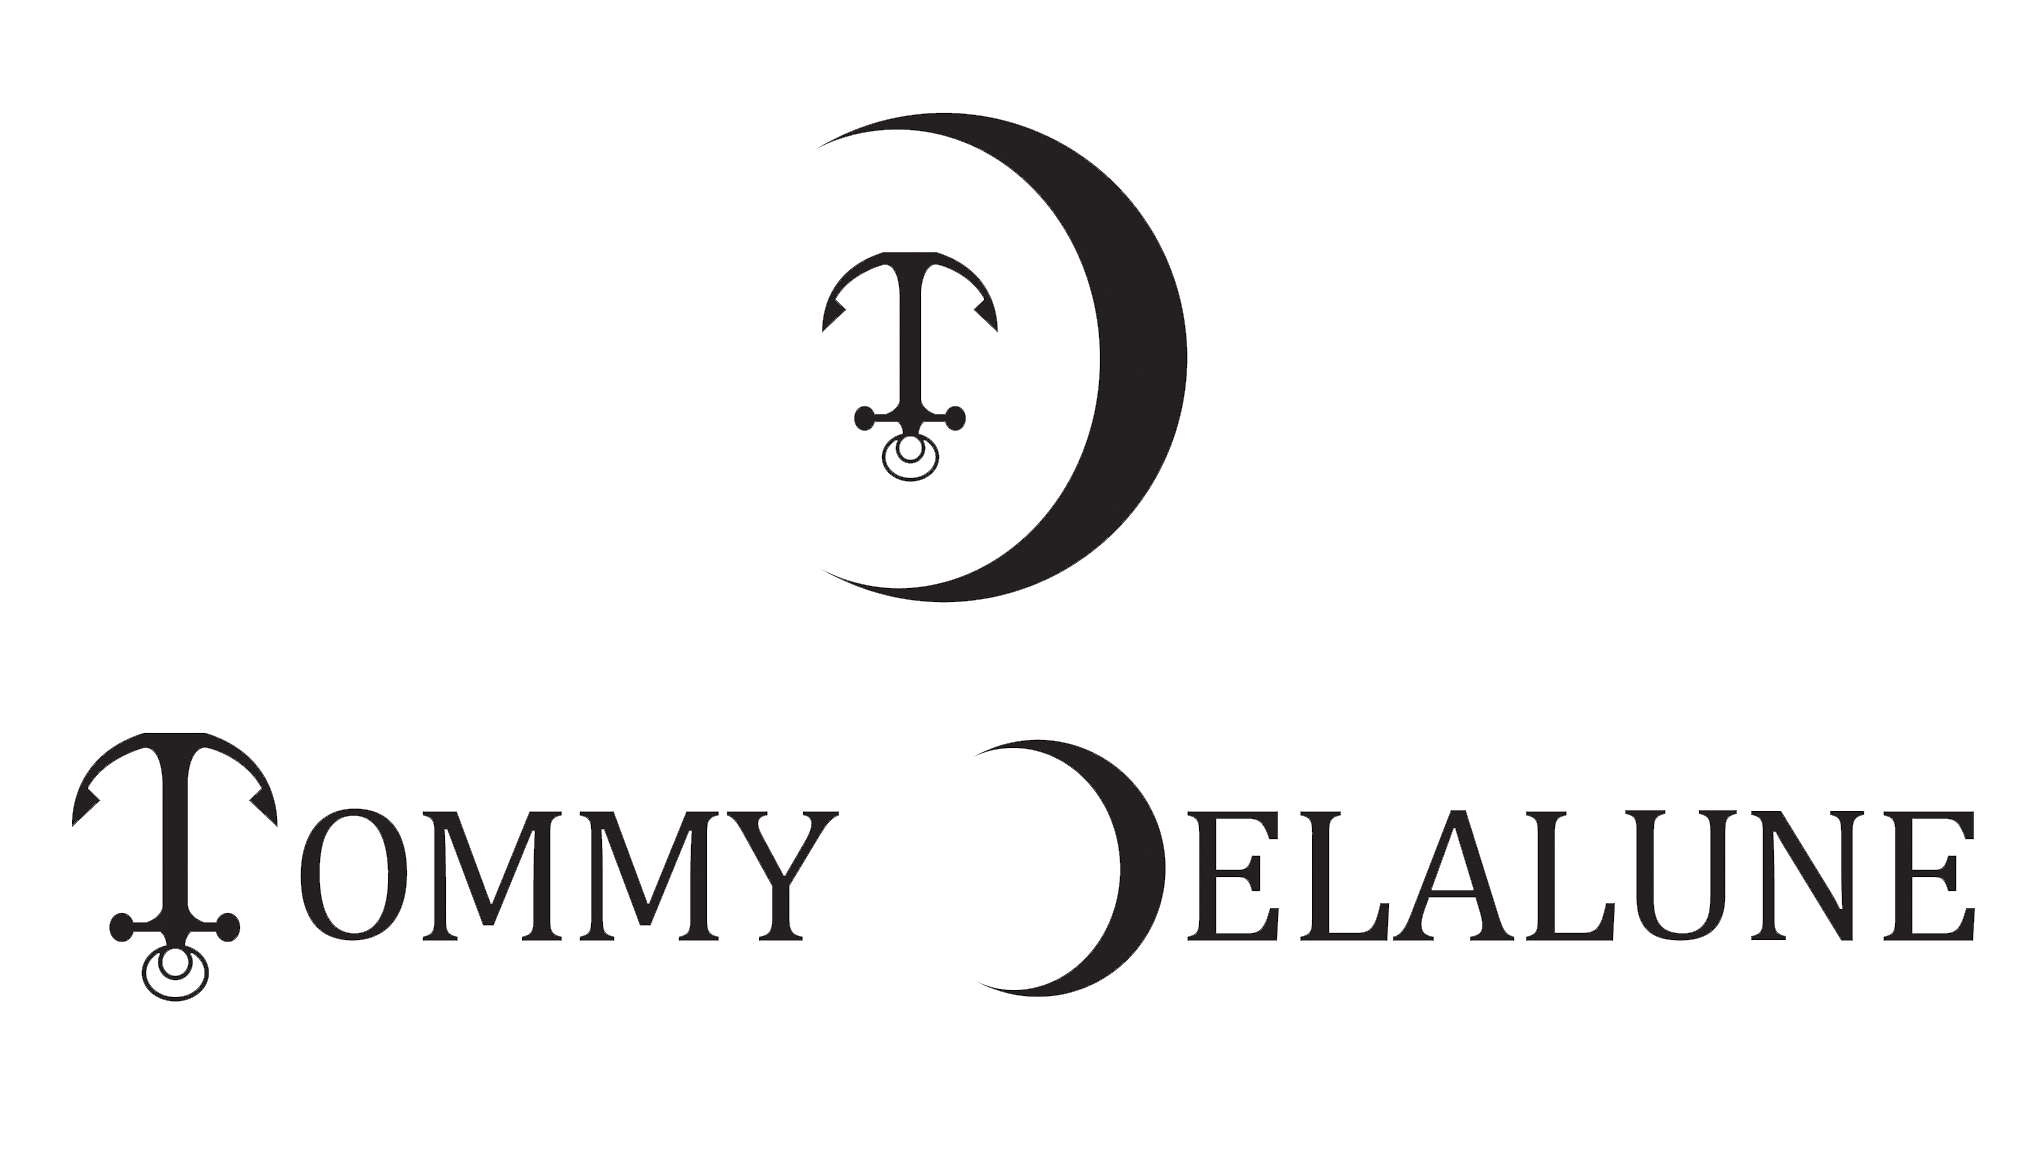 TOMMY DELALUNE